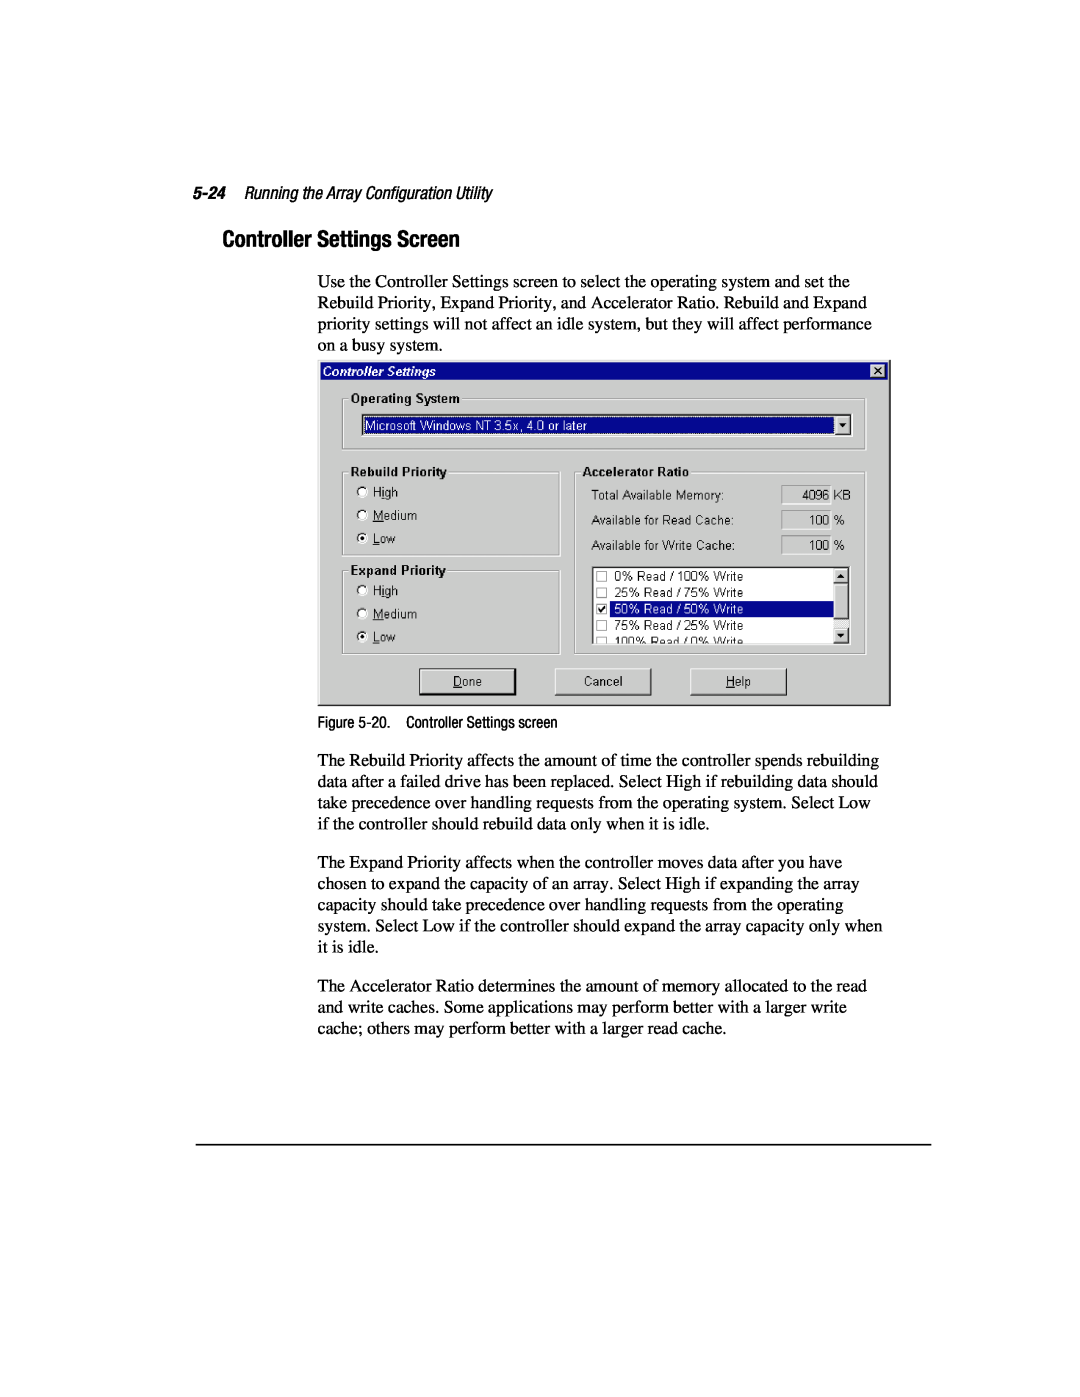 Compaq 3200 manual Controller Settings Screen, Running the Array Configuration Utility 